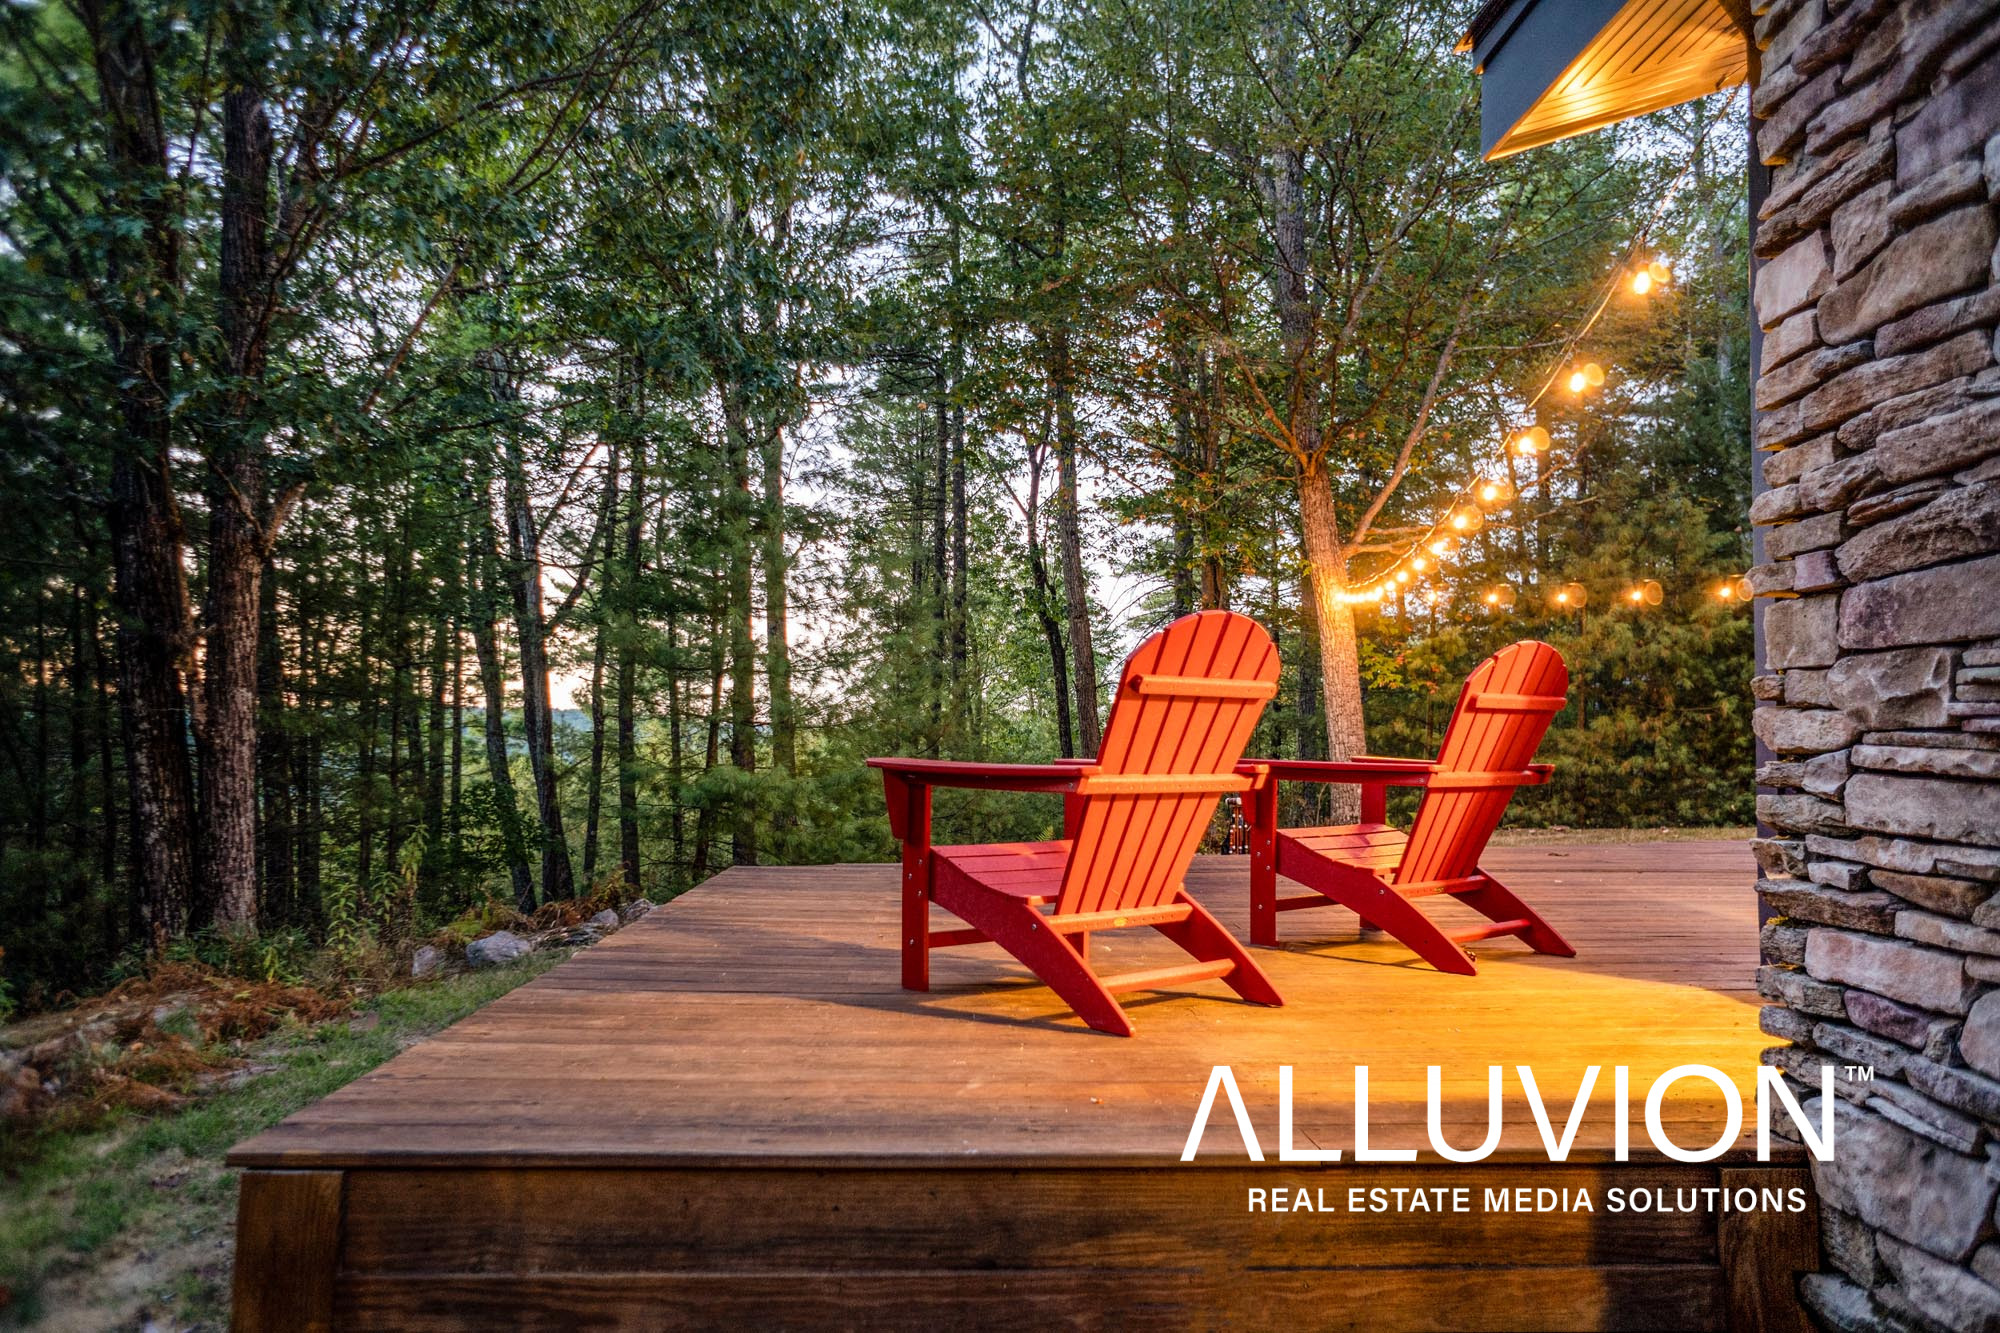 Contemporary Catskill Mountains Cabin – Airbnb Photography by Maxwell Alexander – Best Airbnb Photography in the Hudson Valley, Catskills, NYC and Hamptons